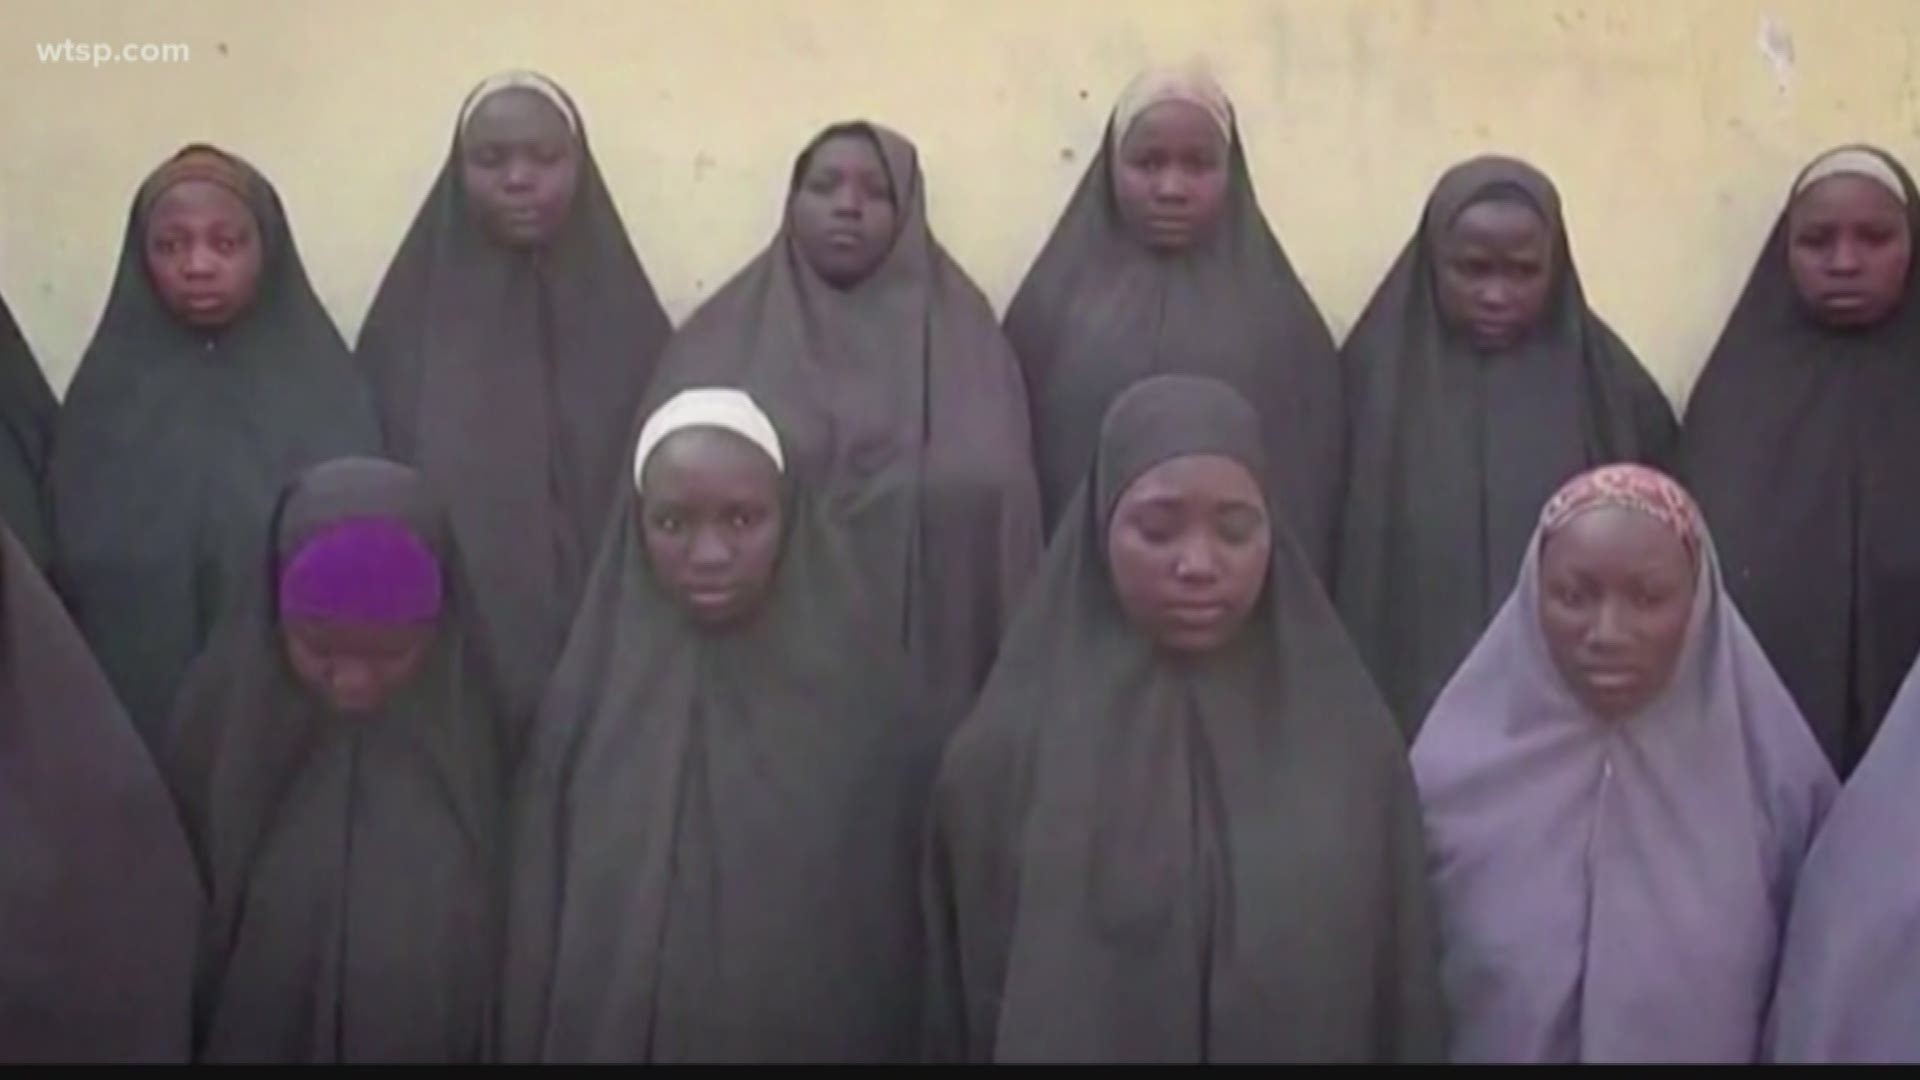 Lydia Pogu was attending a Christian school in Nigeria when Islamic militant group Boko Haram stormed inside and kidnapped 276 girls.